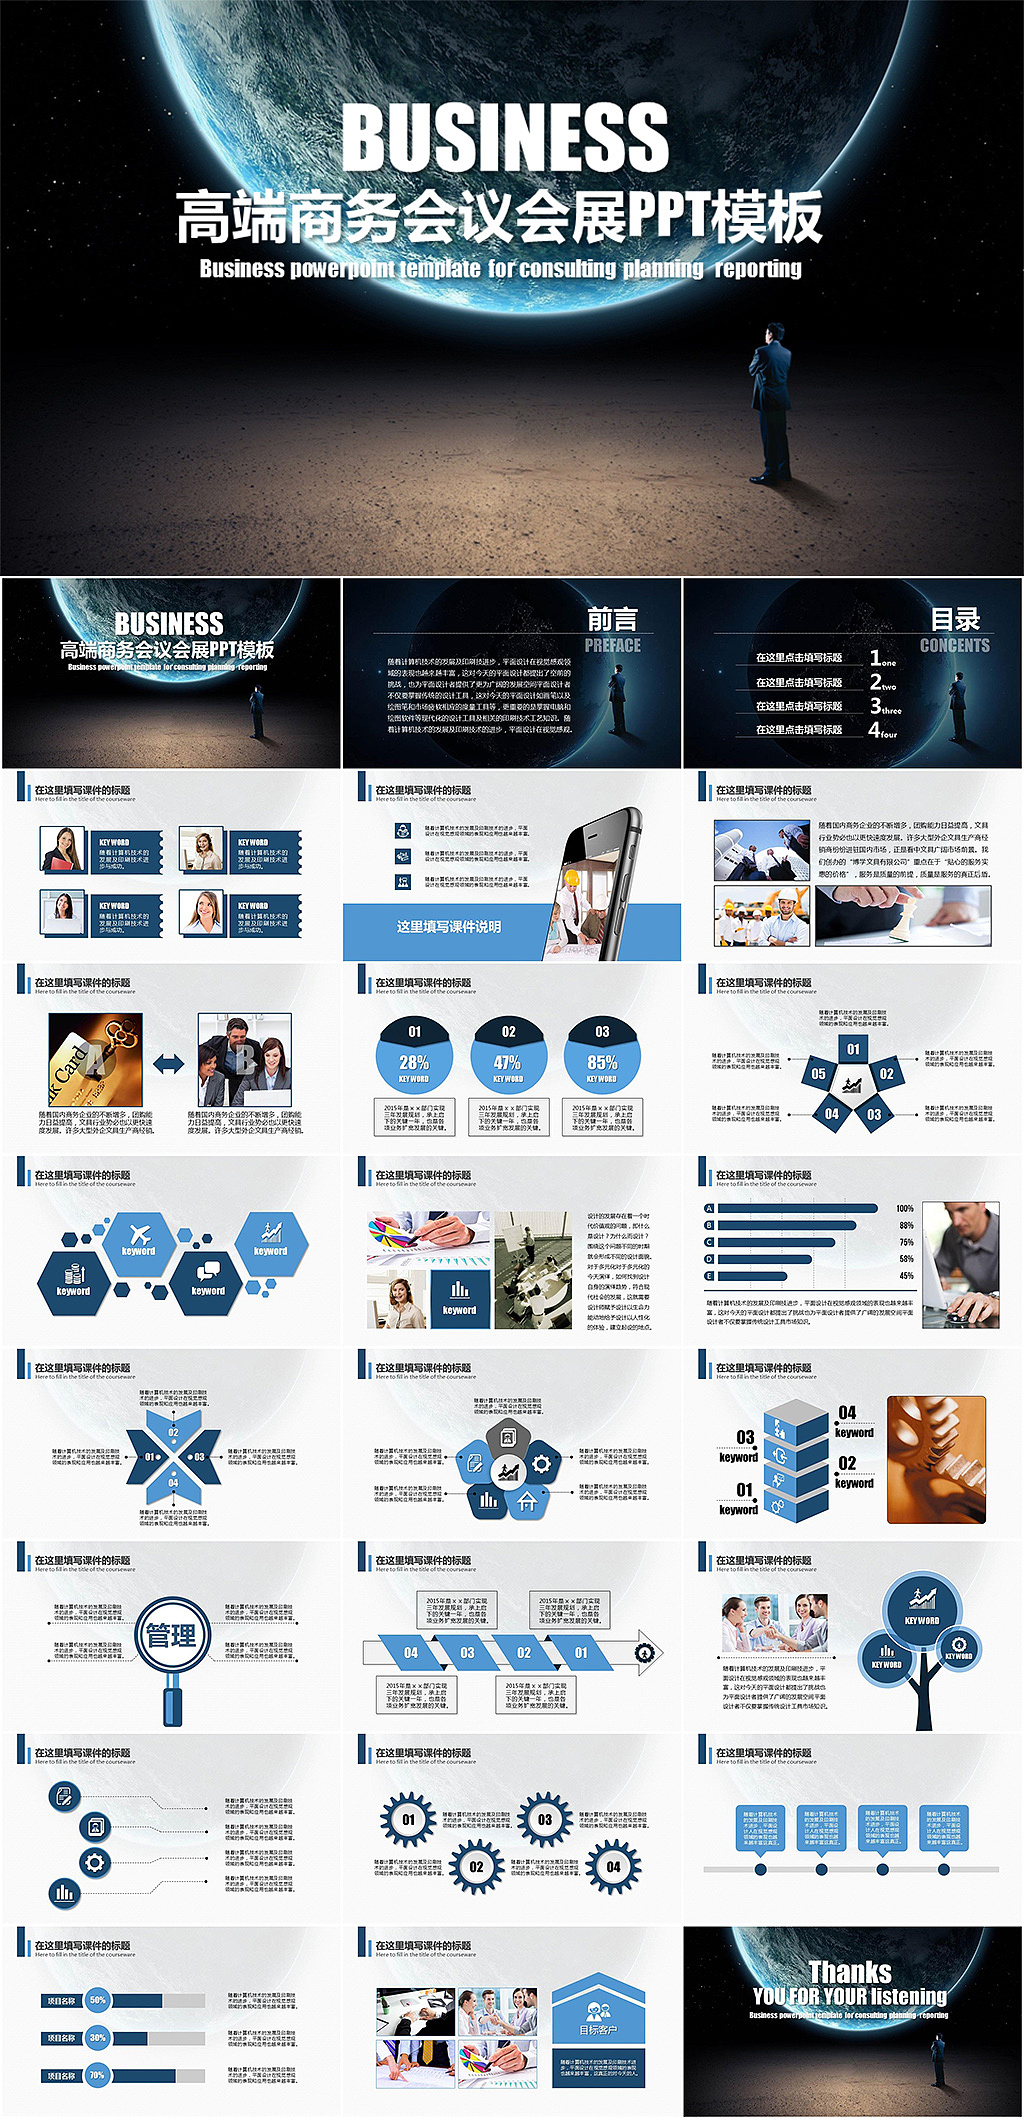 Atmospheric high-end conference and exhibition summary report PPT template